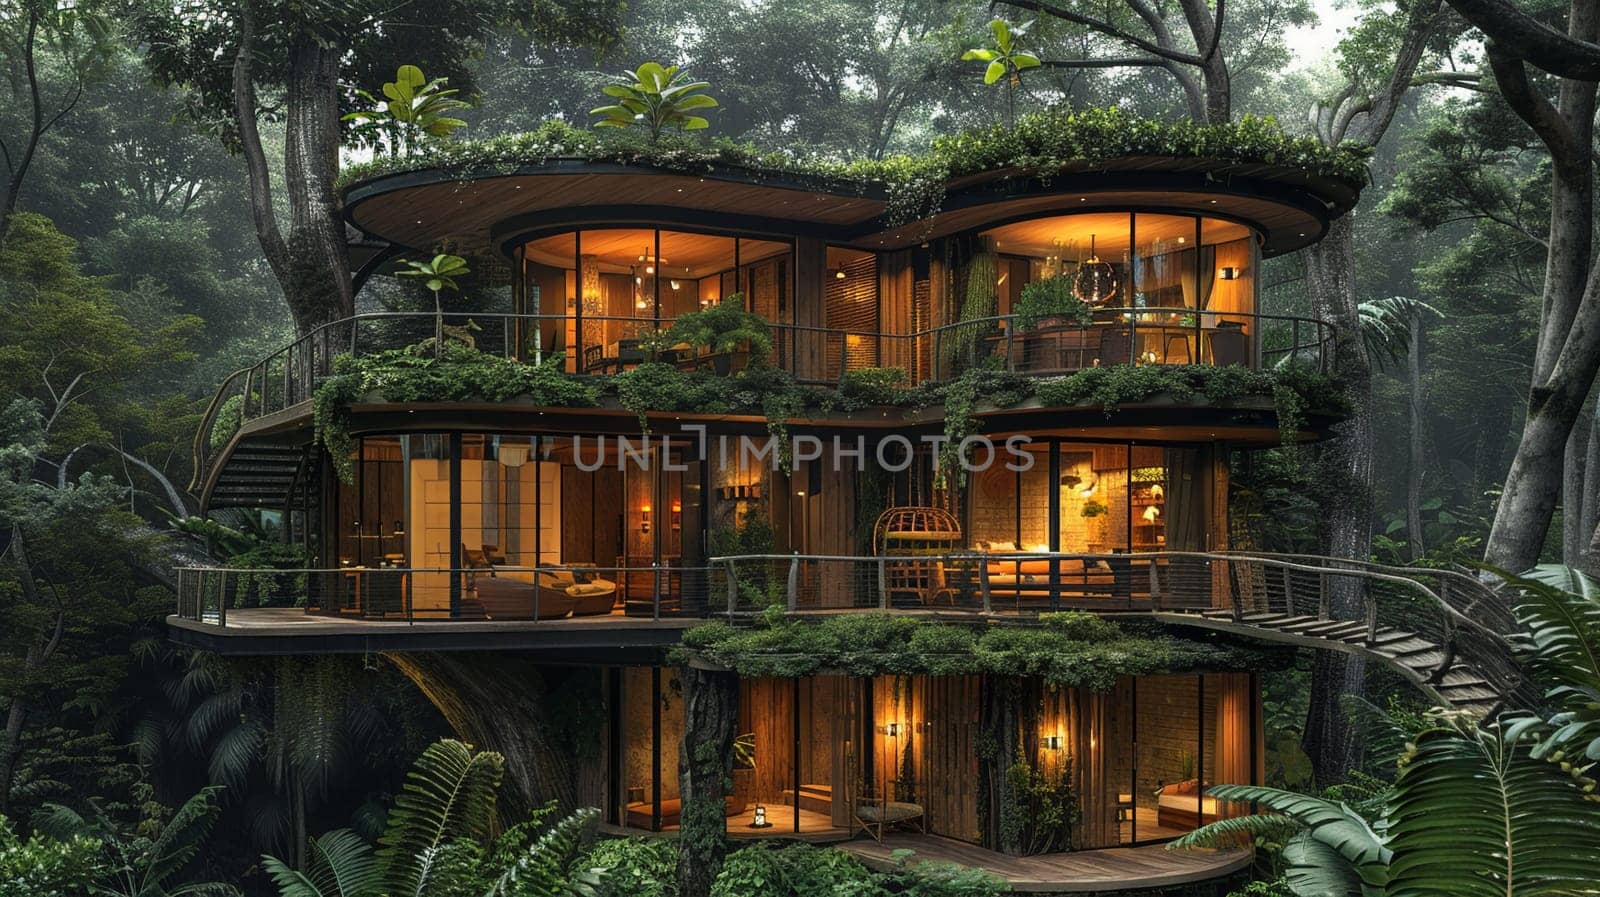 Elevated Treehouse with Stunning Tropical Rainforest View, tropical treehouse for an exotic escape.